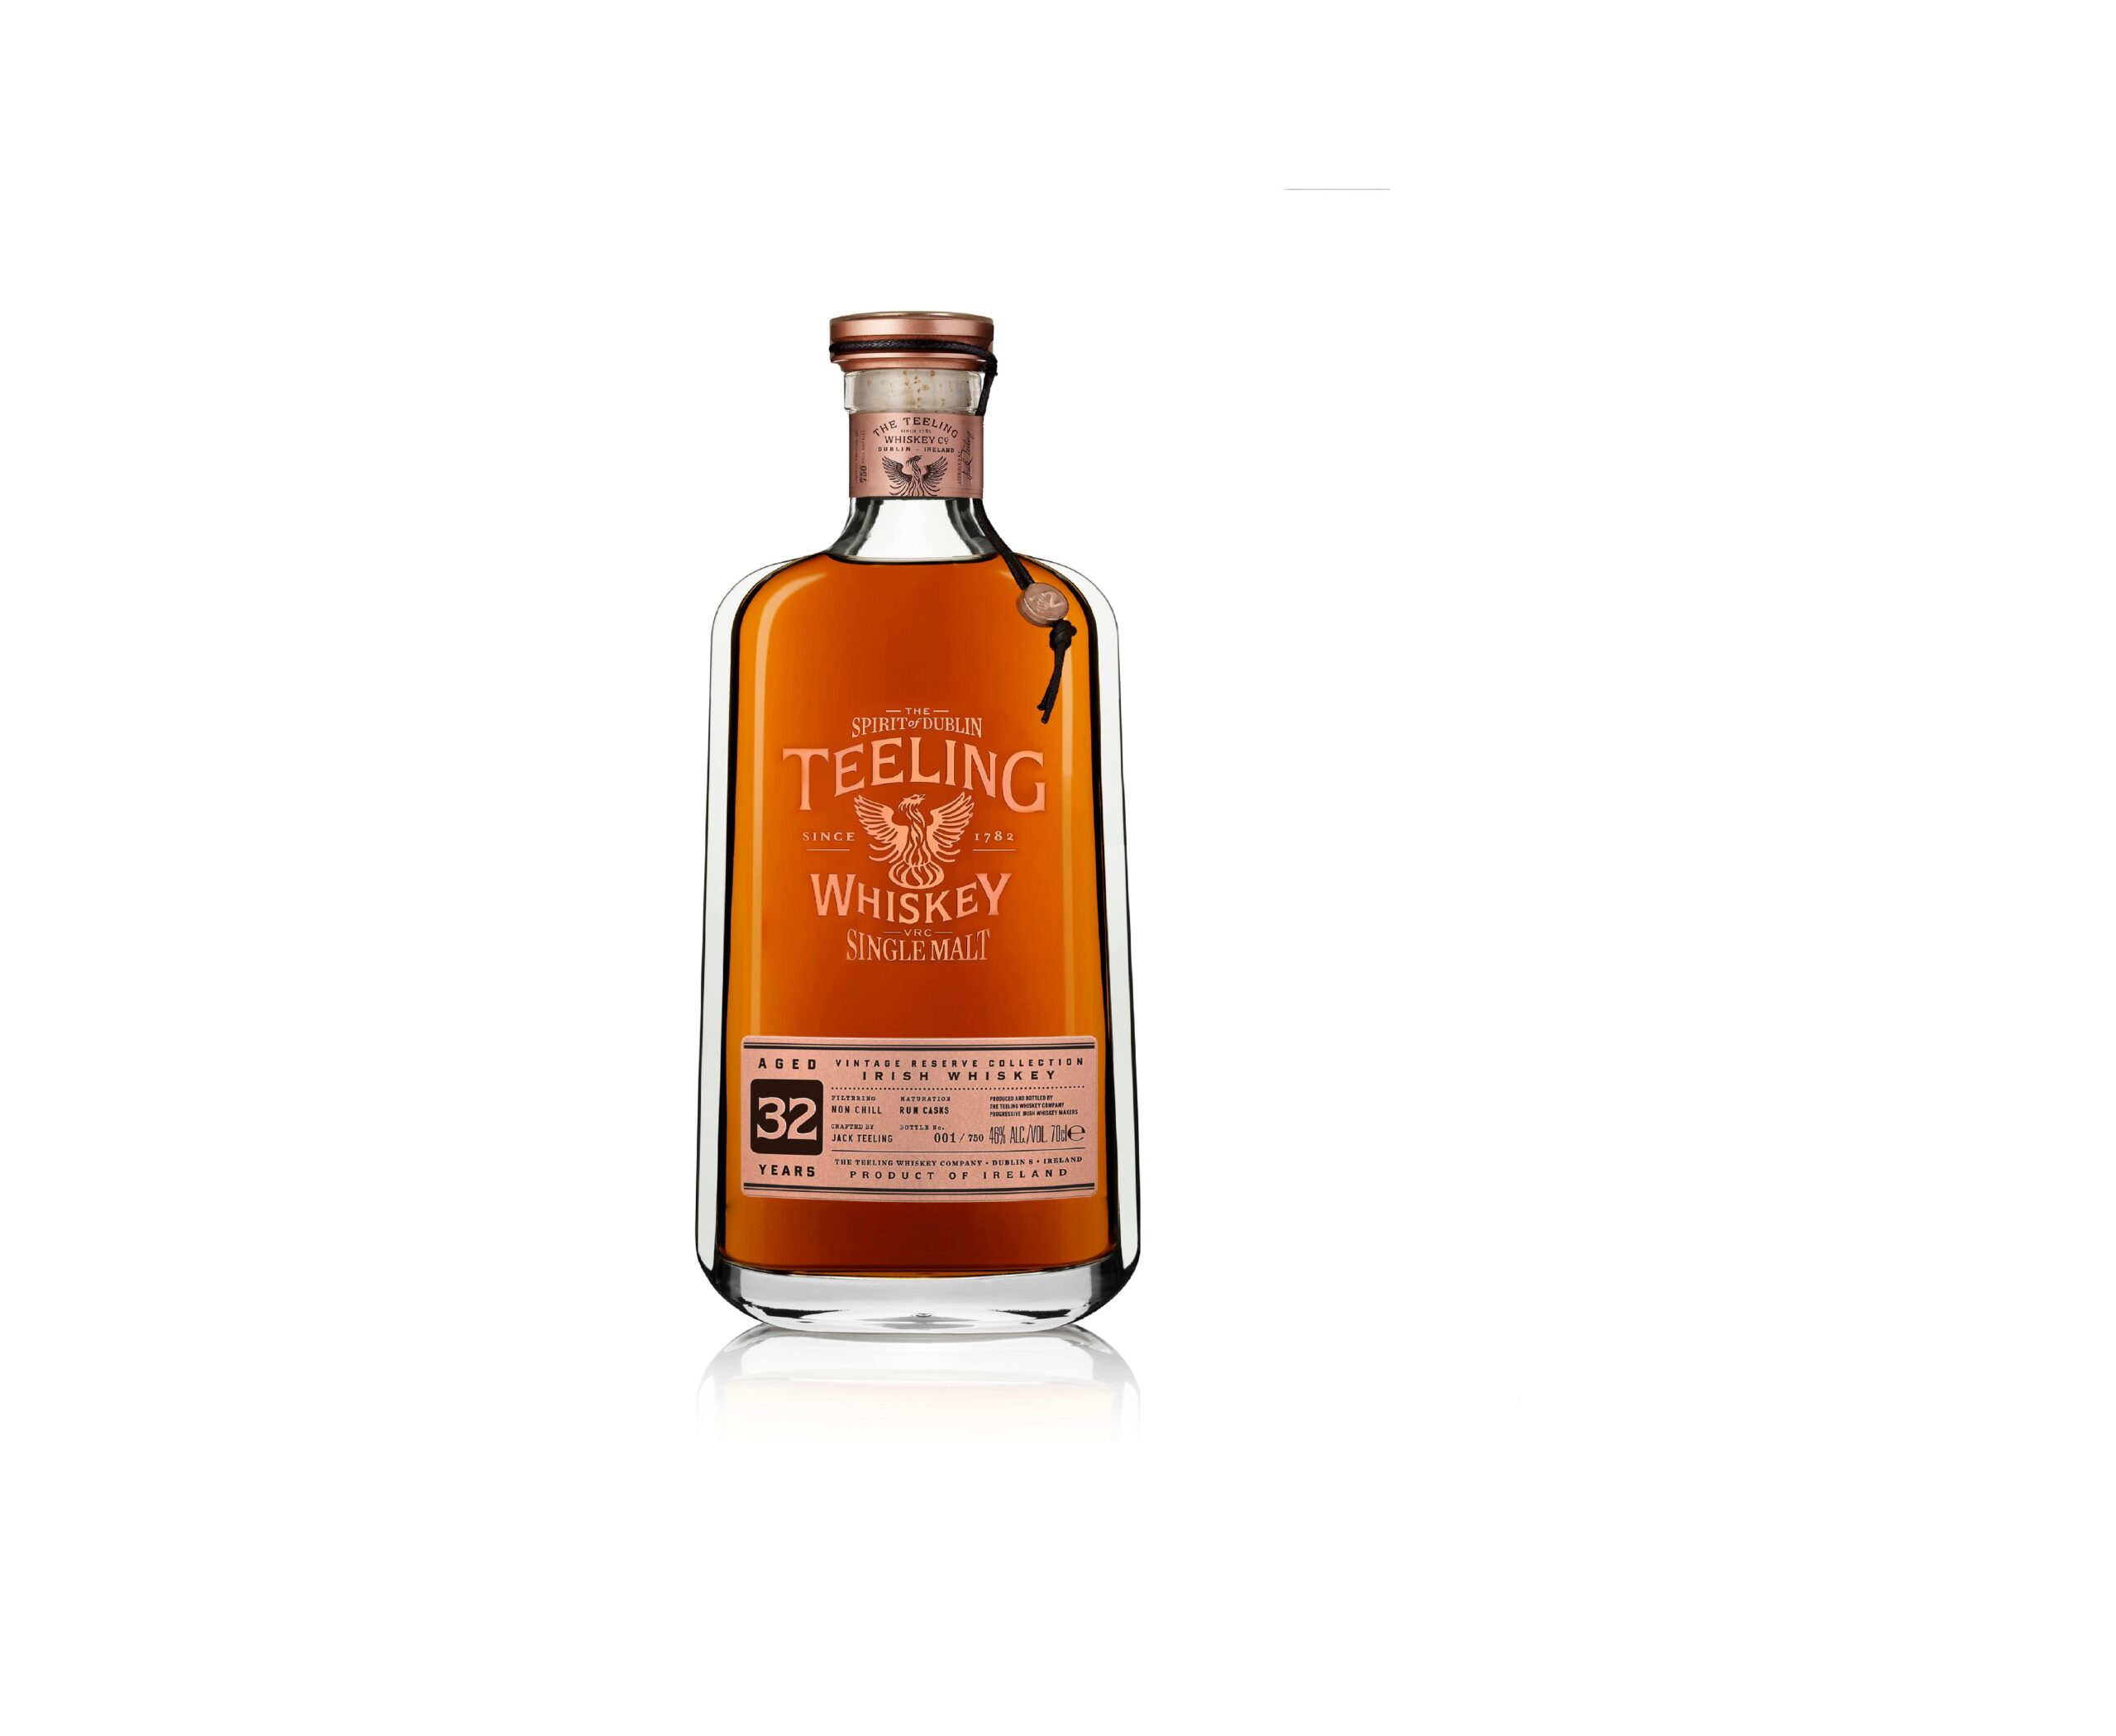 Teeling Whiskey S 32 Year Old Single Malt Rum Cask Finish Product Launch Just Drinks